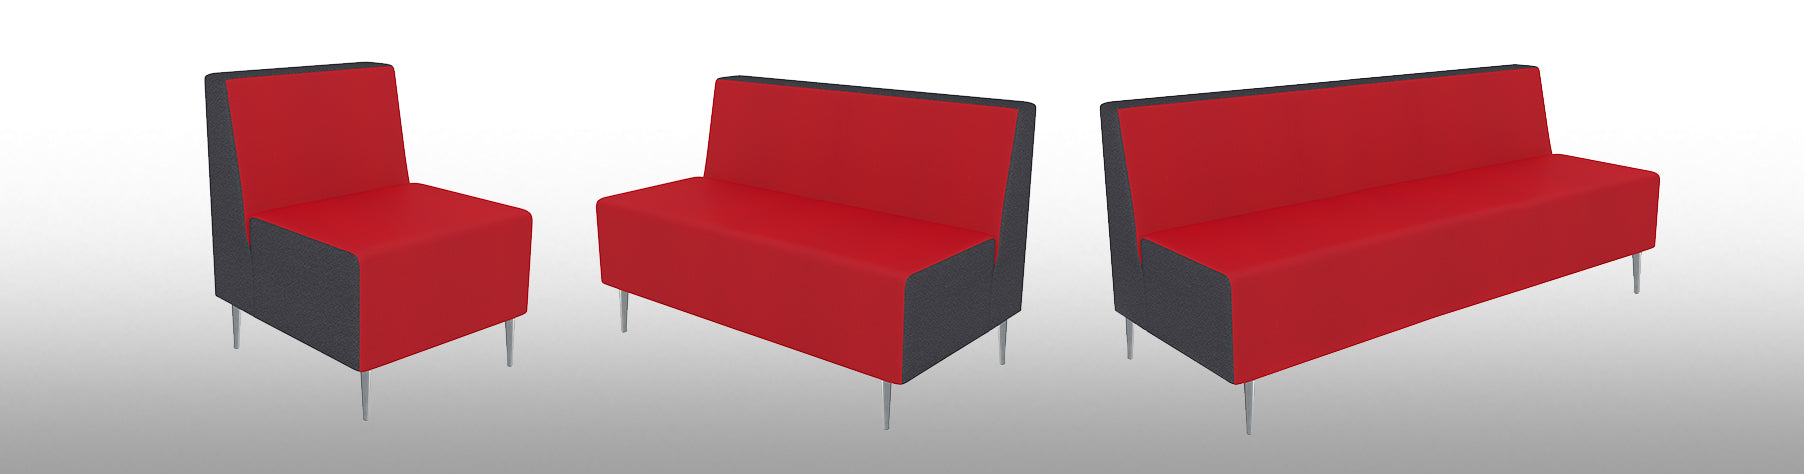 Chair Solutions Koo Lounge Soft Seating